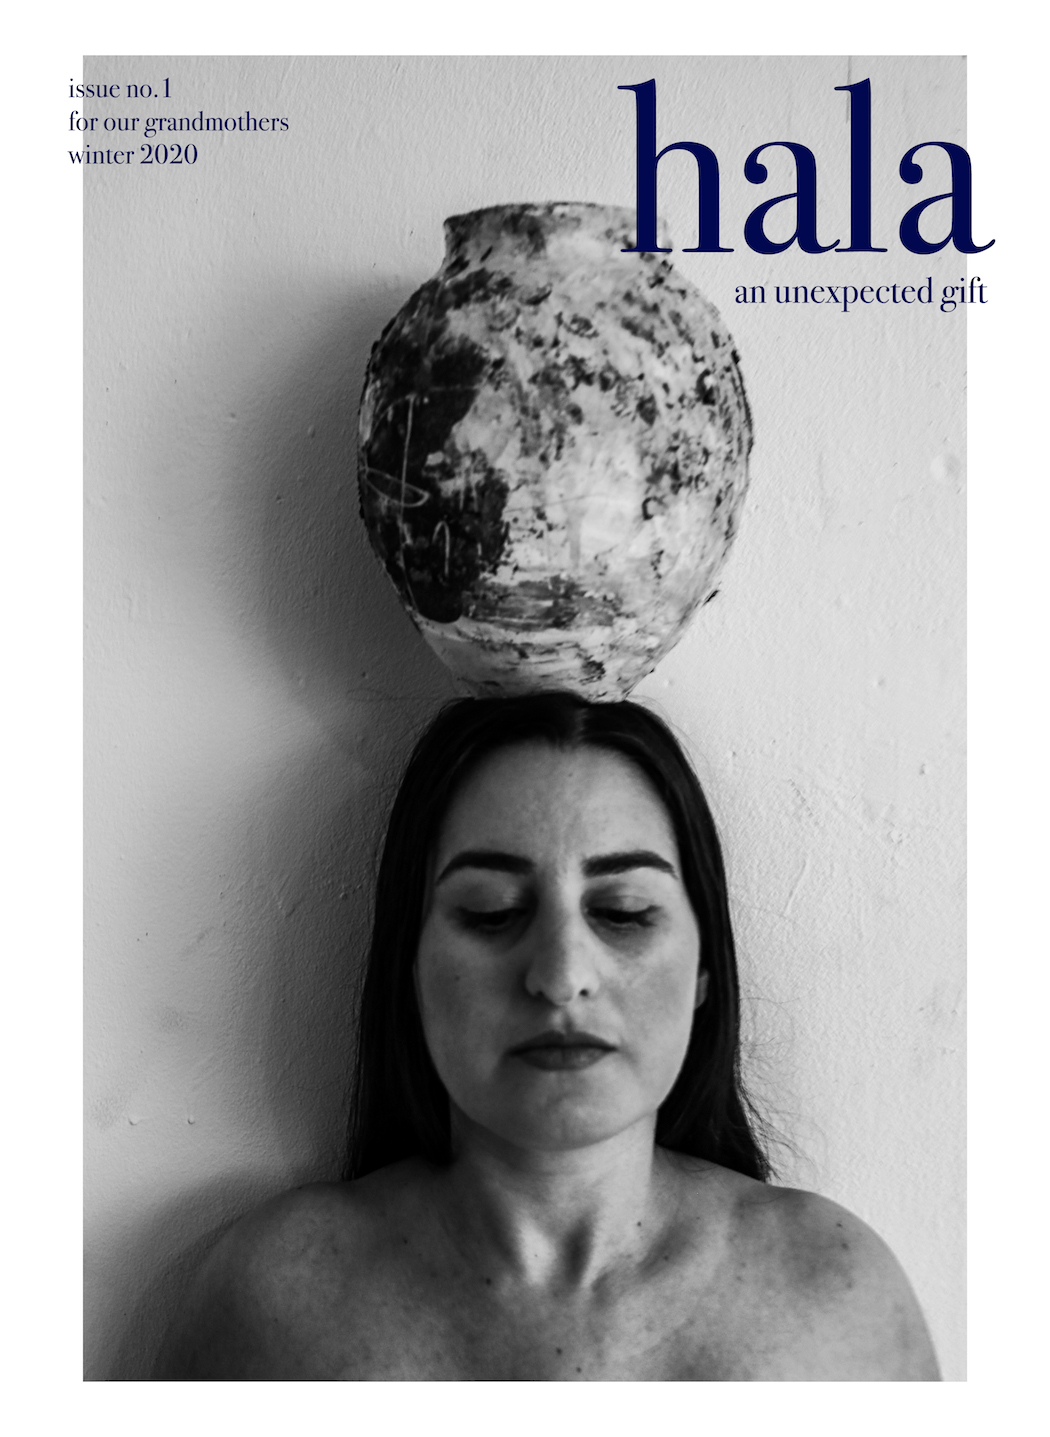 hala (cover), adama delphine fawundu and orlee malka, winter 2020, issue 1, for our grandmothers